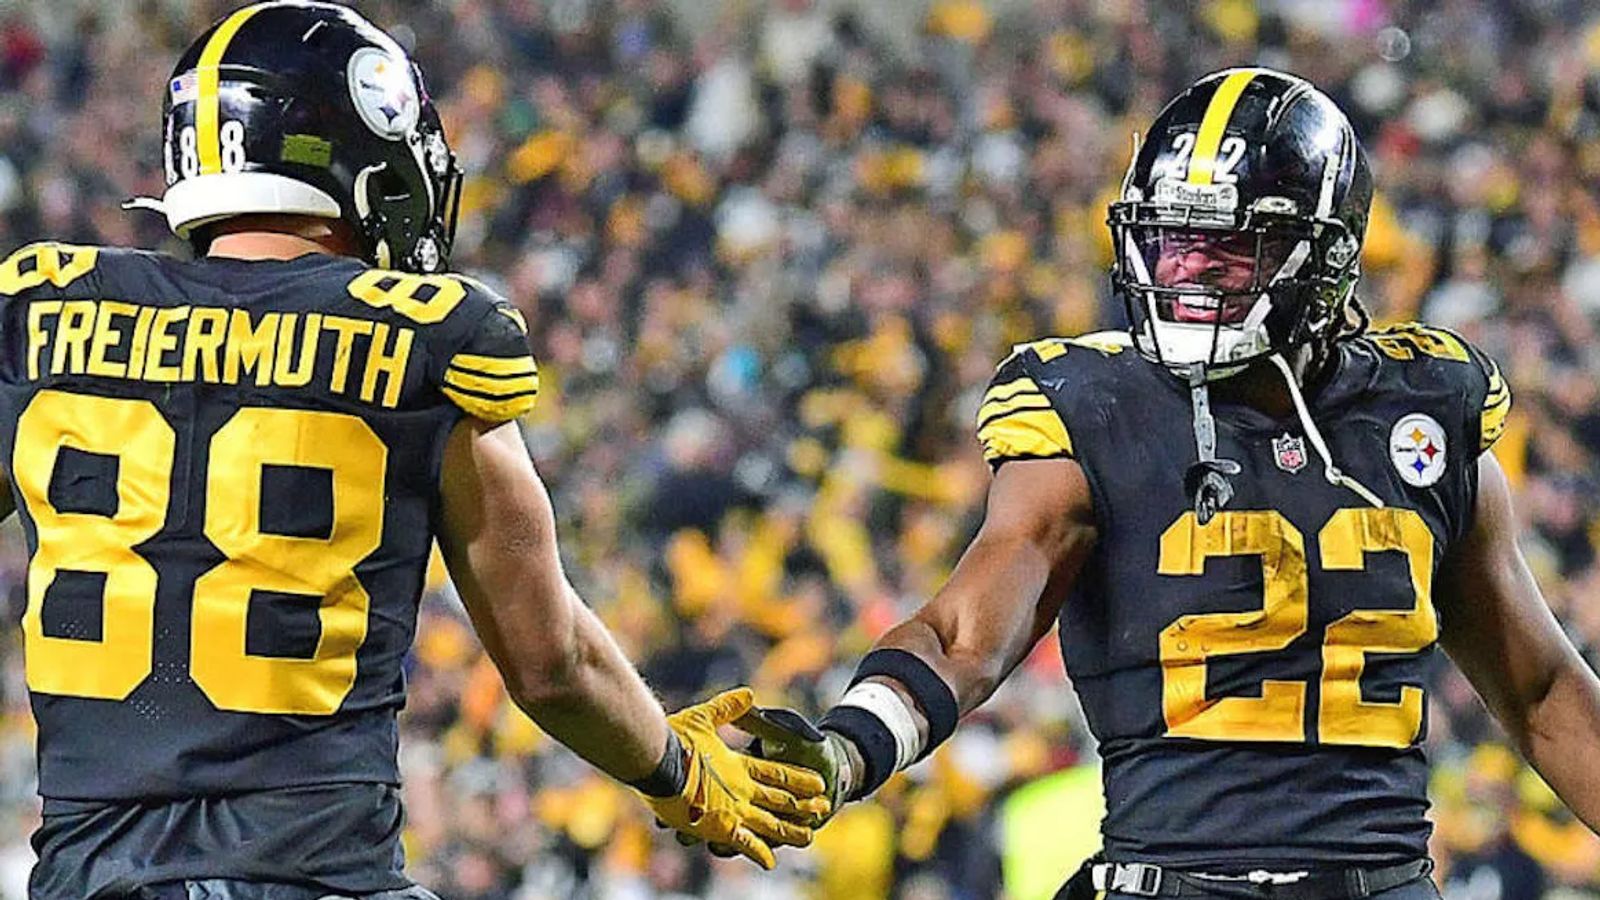 New Kids on the Block in 2022; Just How Young is this Steelers